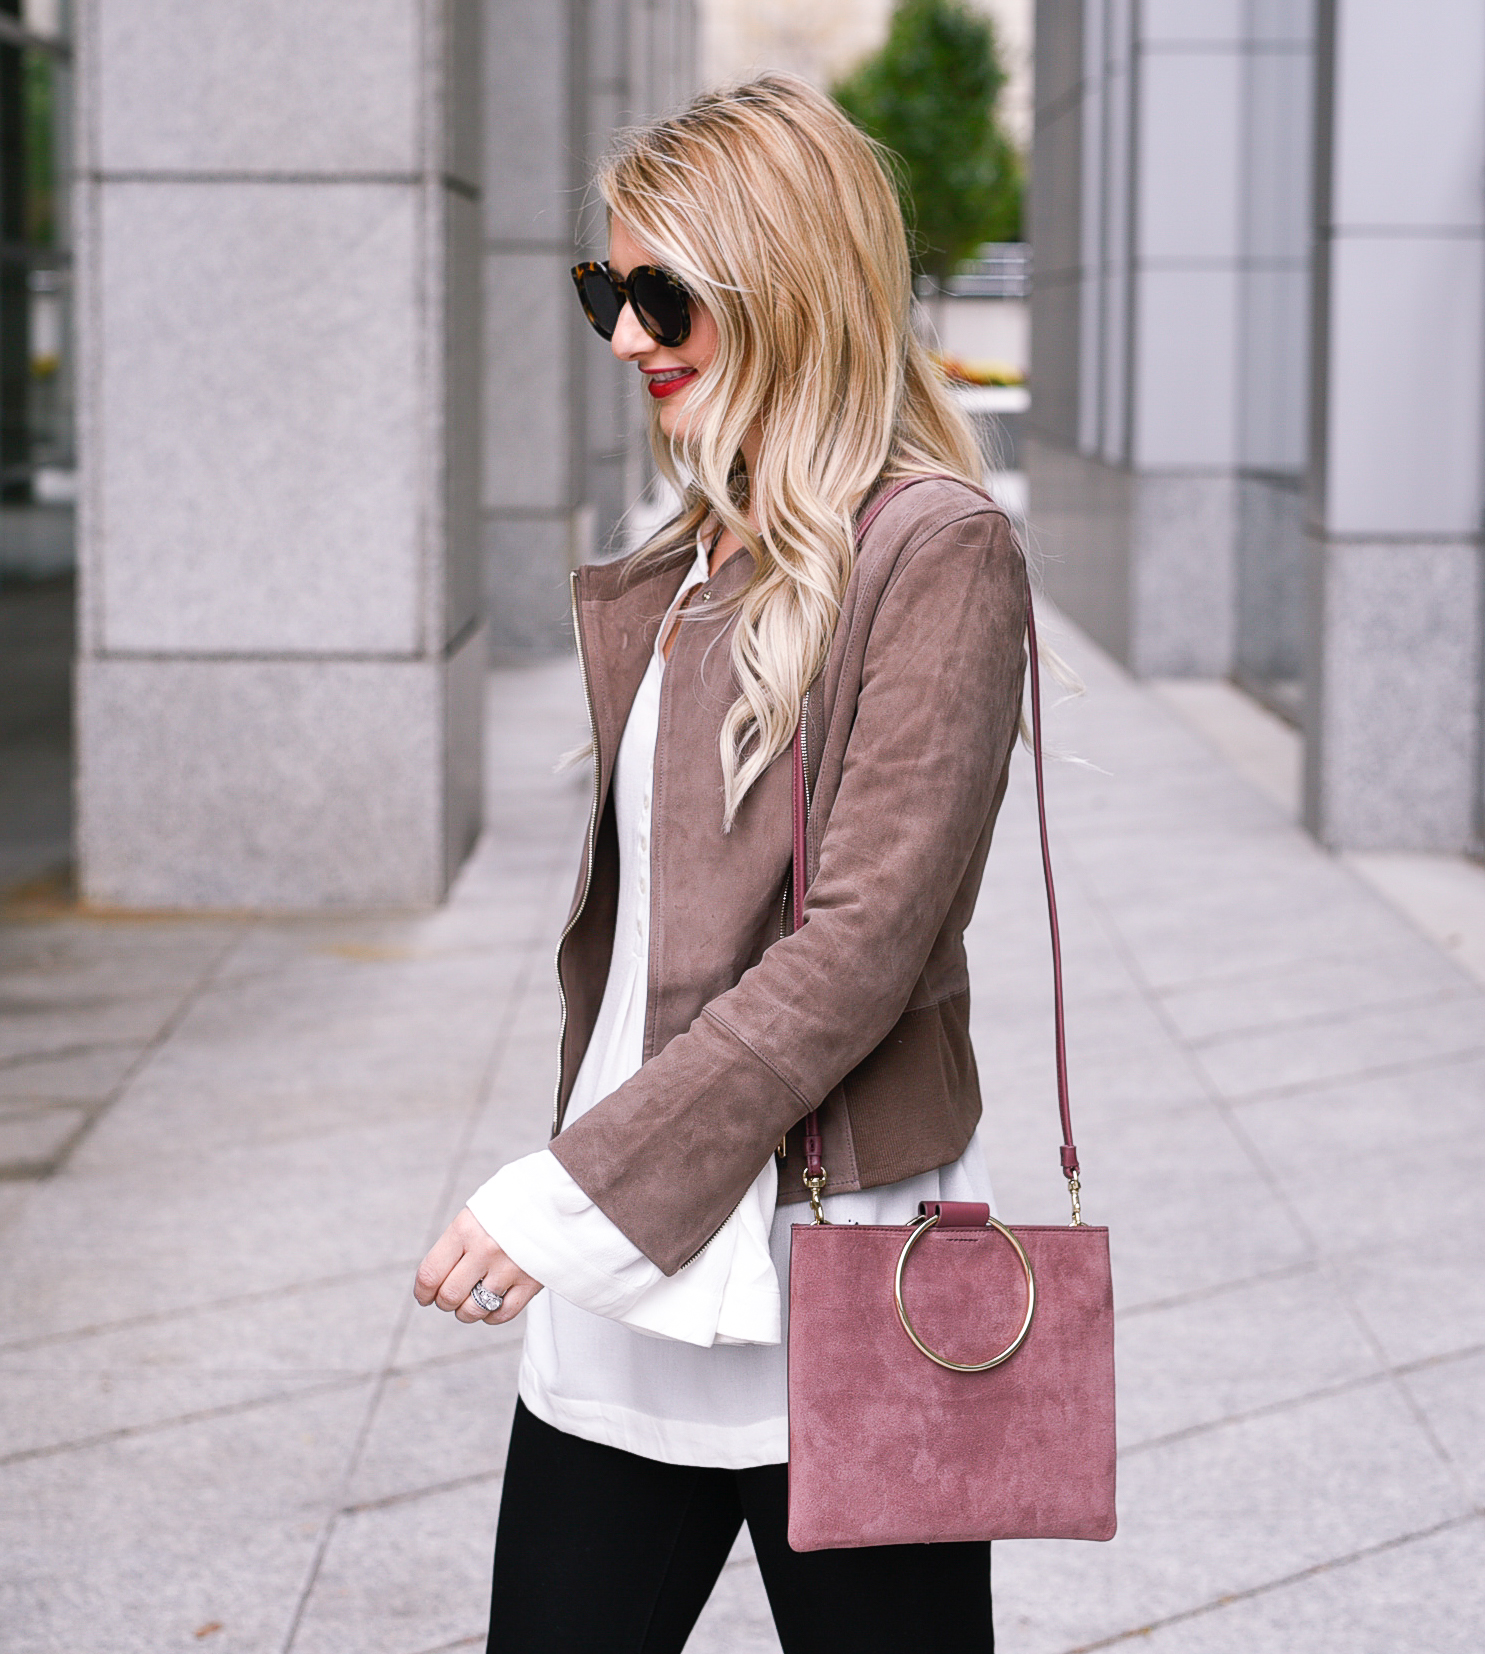 Jenna Colgrove wearing a suede jacket and blush crossbody bag.